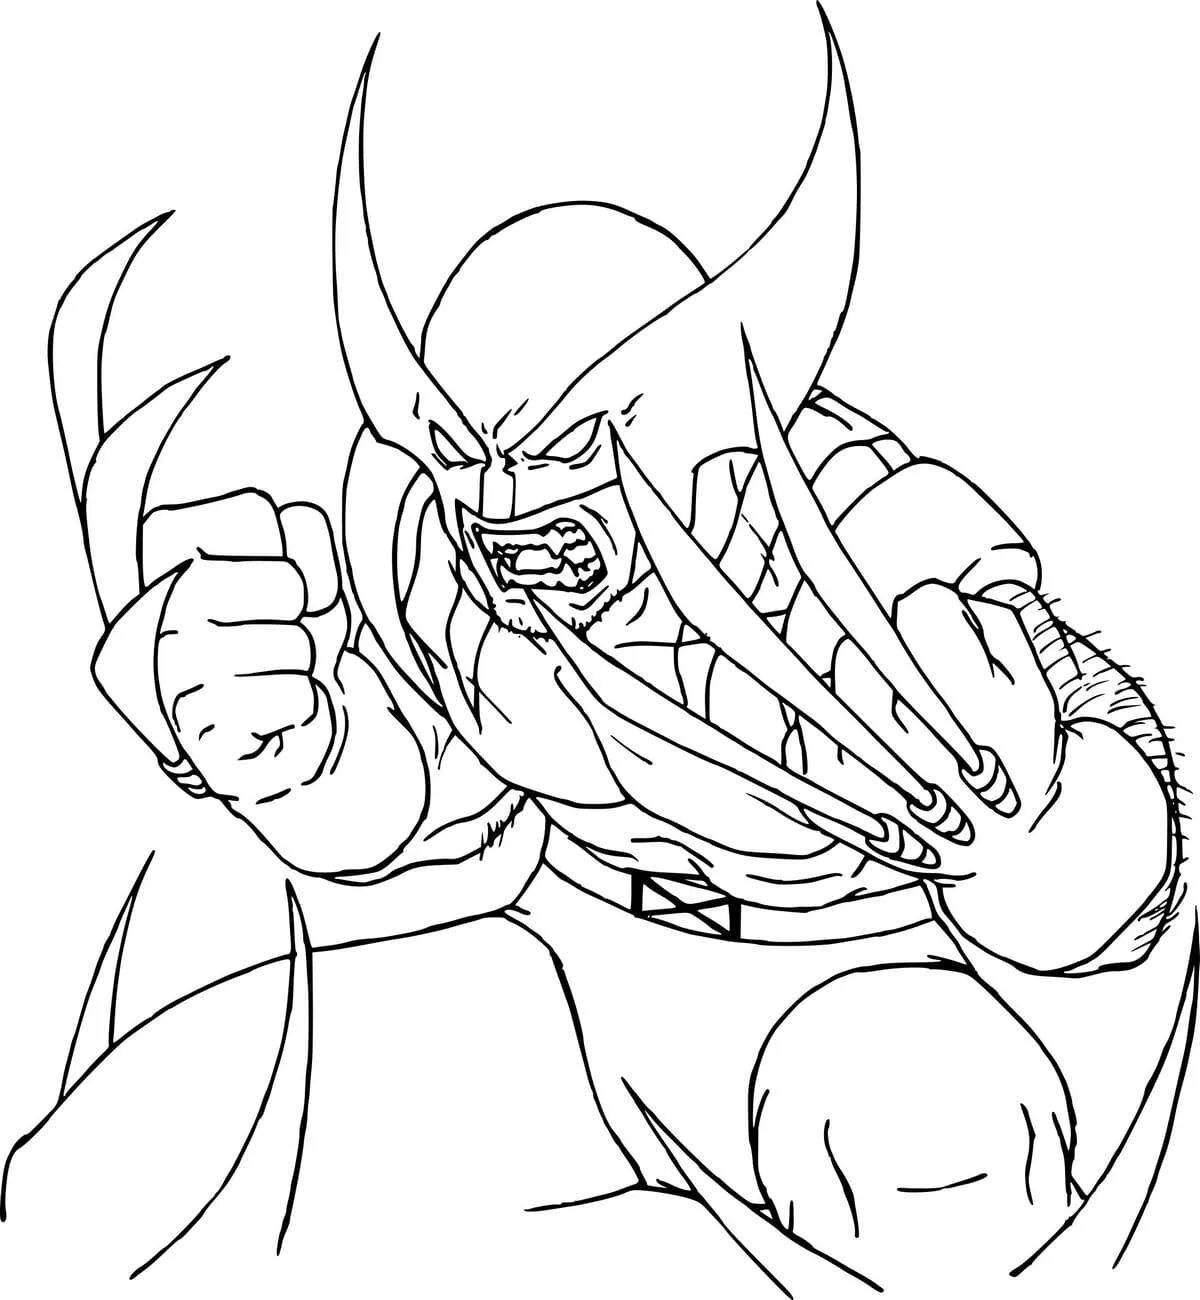 Marvel wolverine sublime coloring book